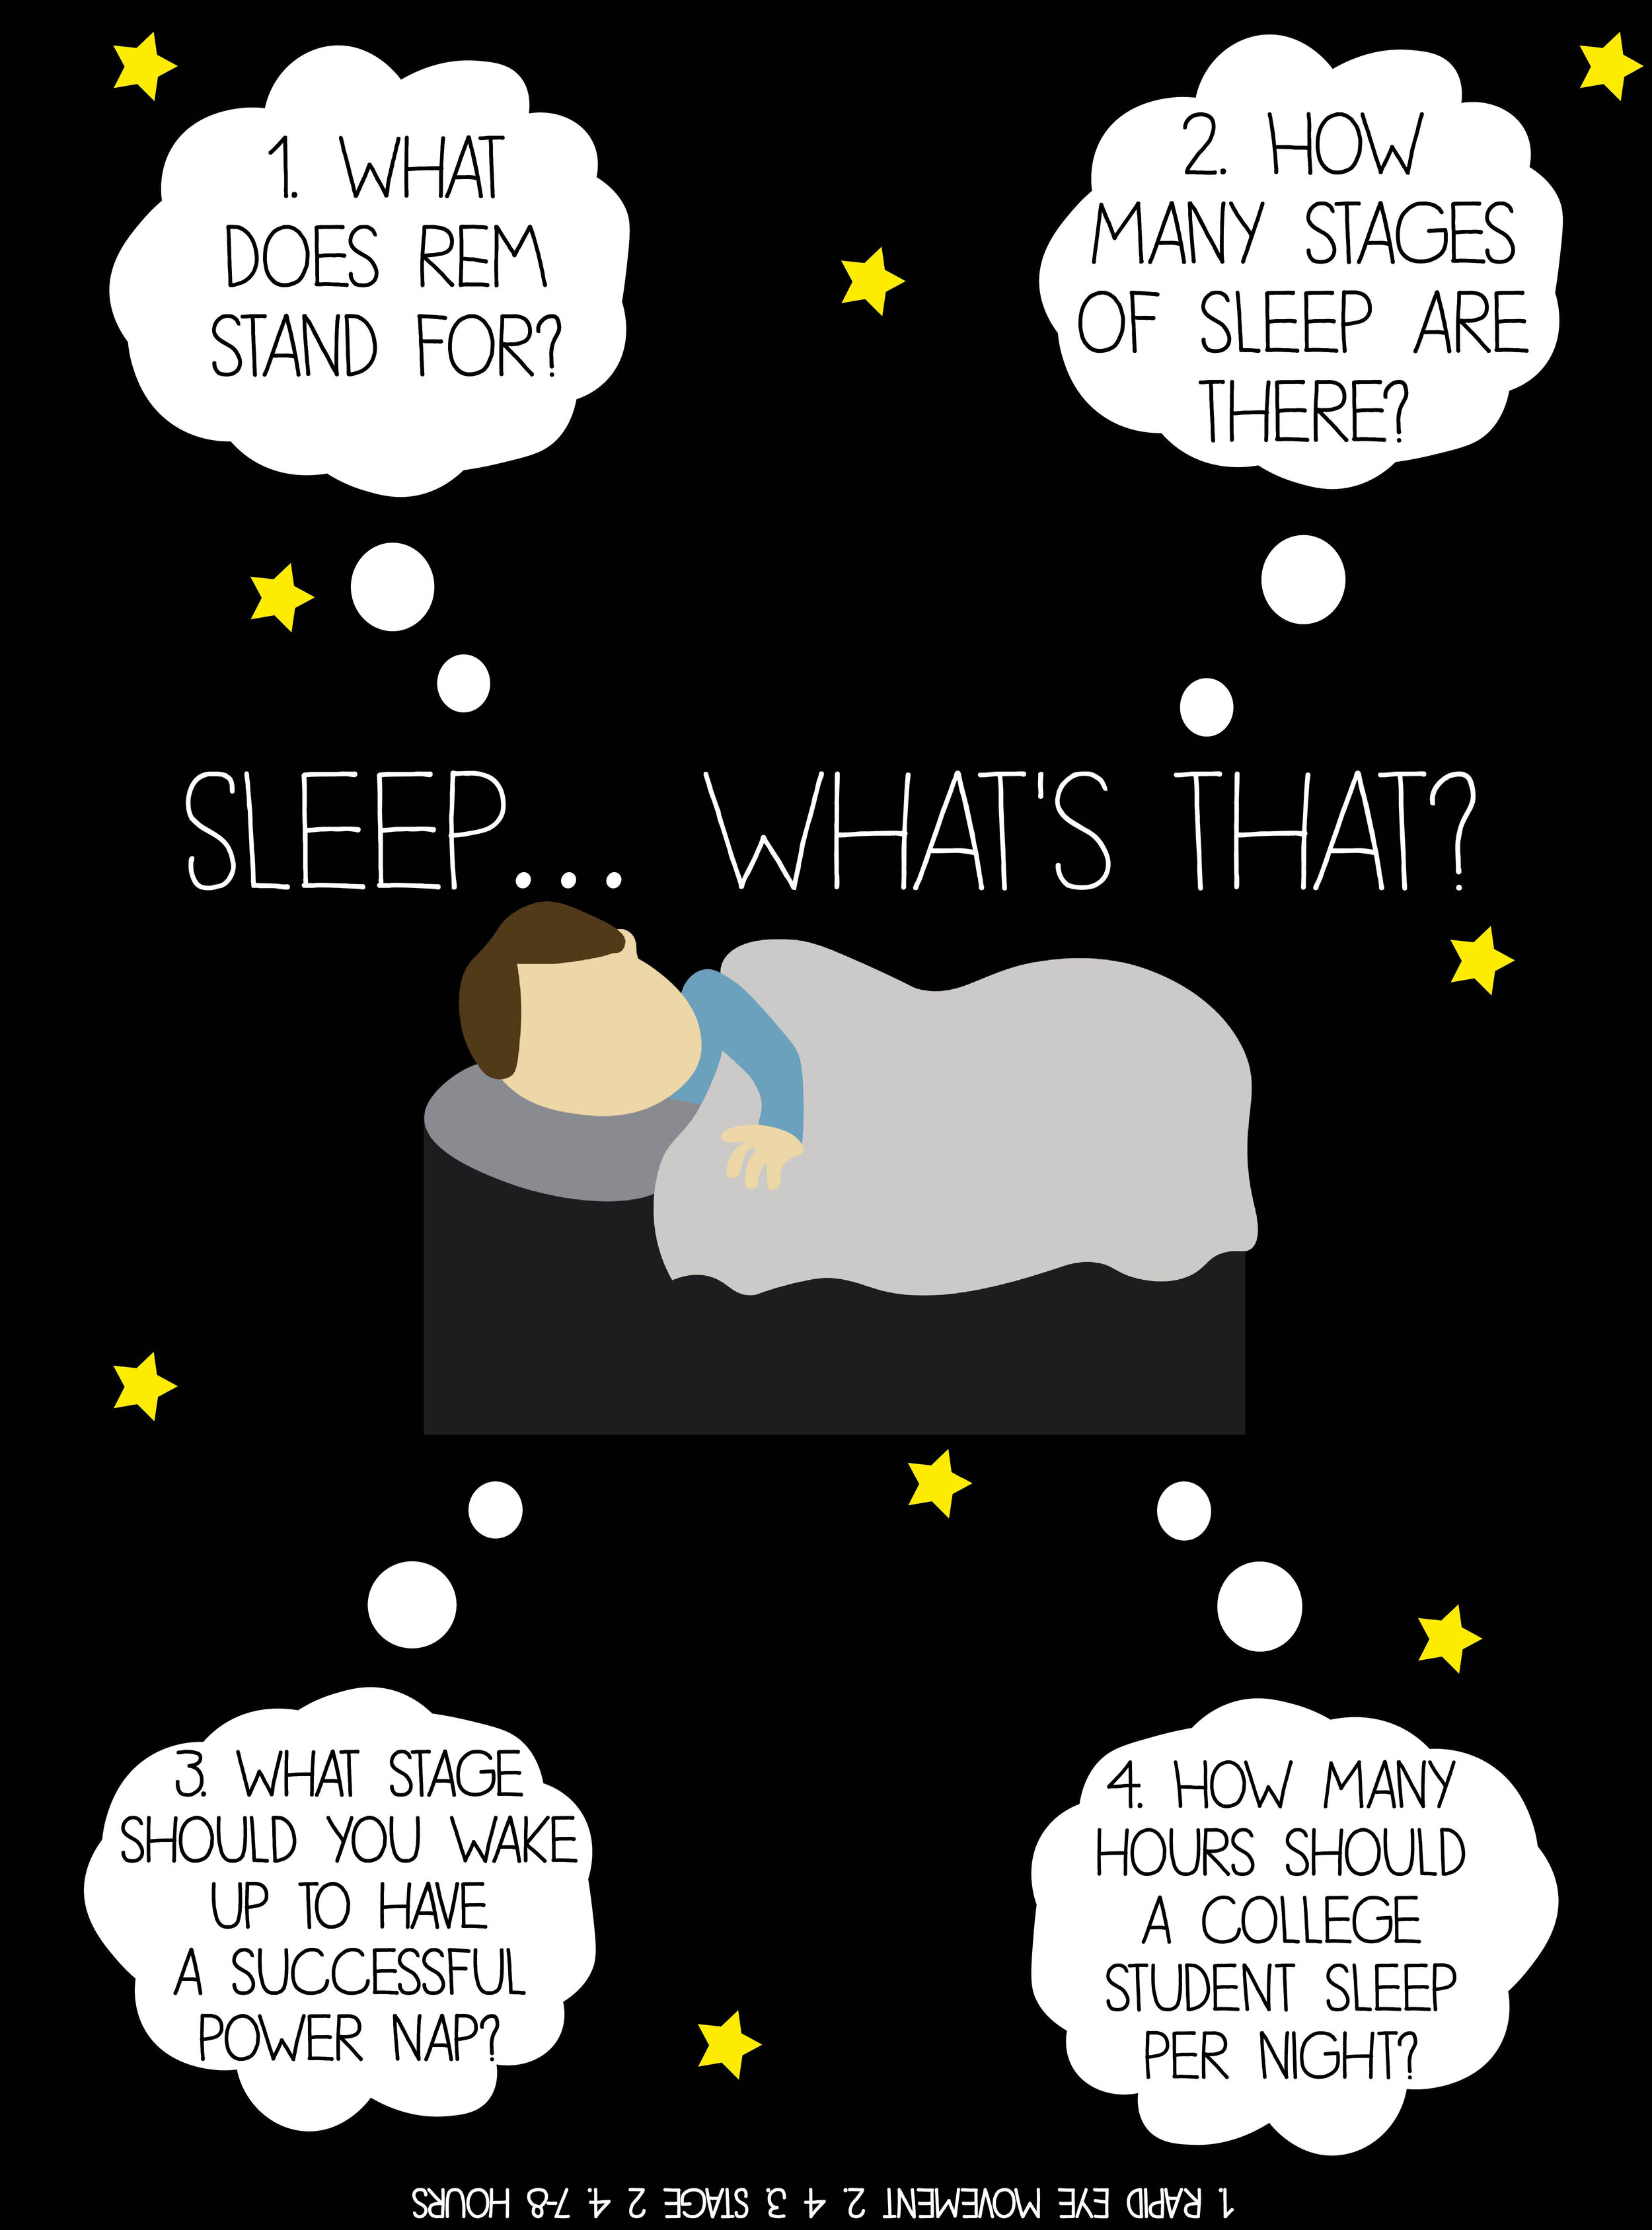 Sleep is a necessity, not an option. As college students, be aware of your sleeping habits and making sure you get enough rest. How well do you know about sleep?